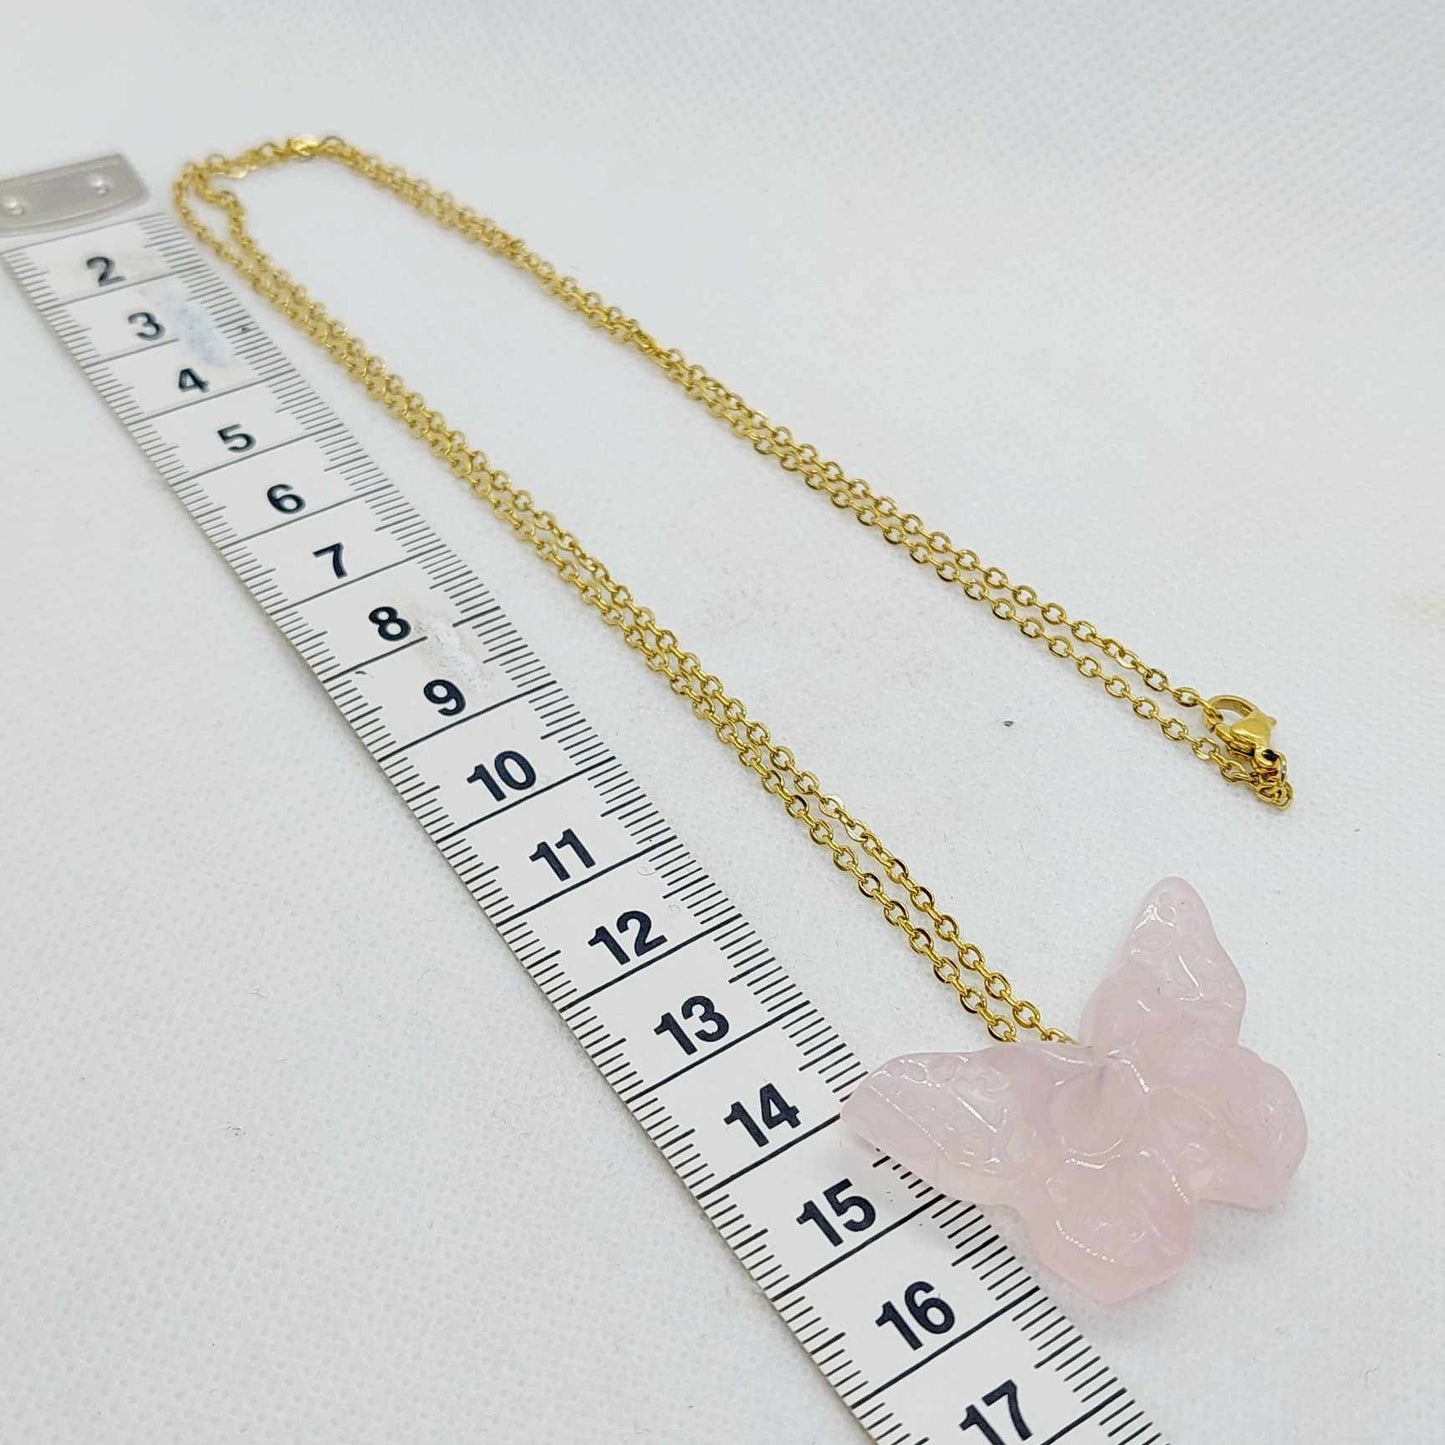 Natural Rose Quartz Skull Butterfly Pendant with Stainless Steel Gold Plated Chain Necklace